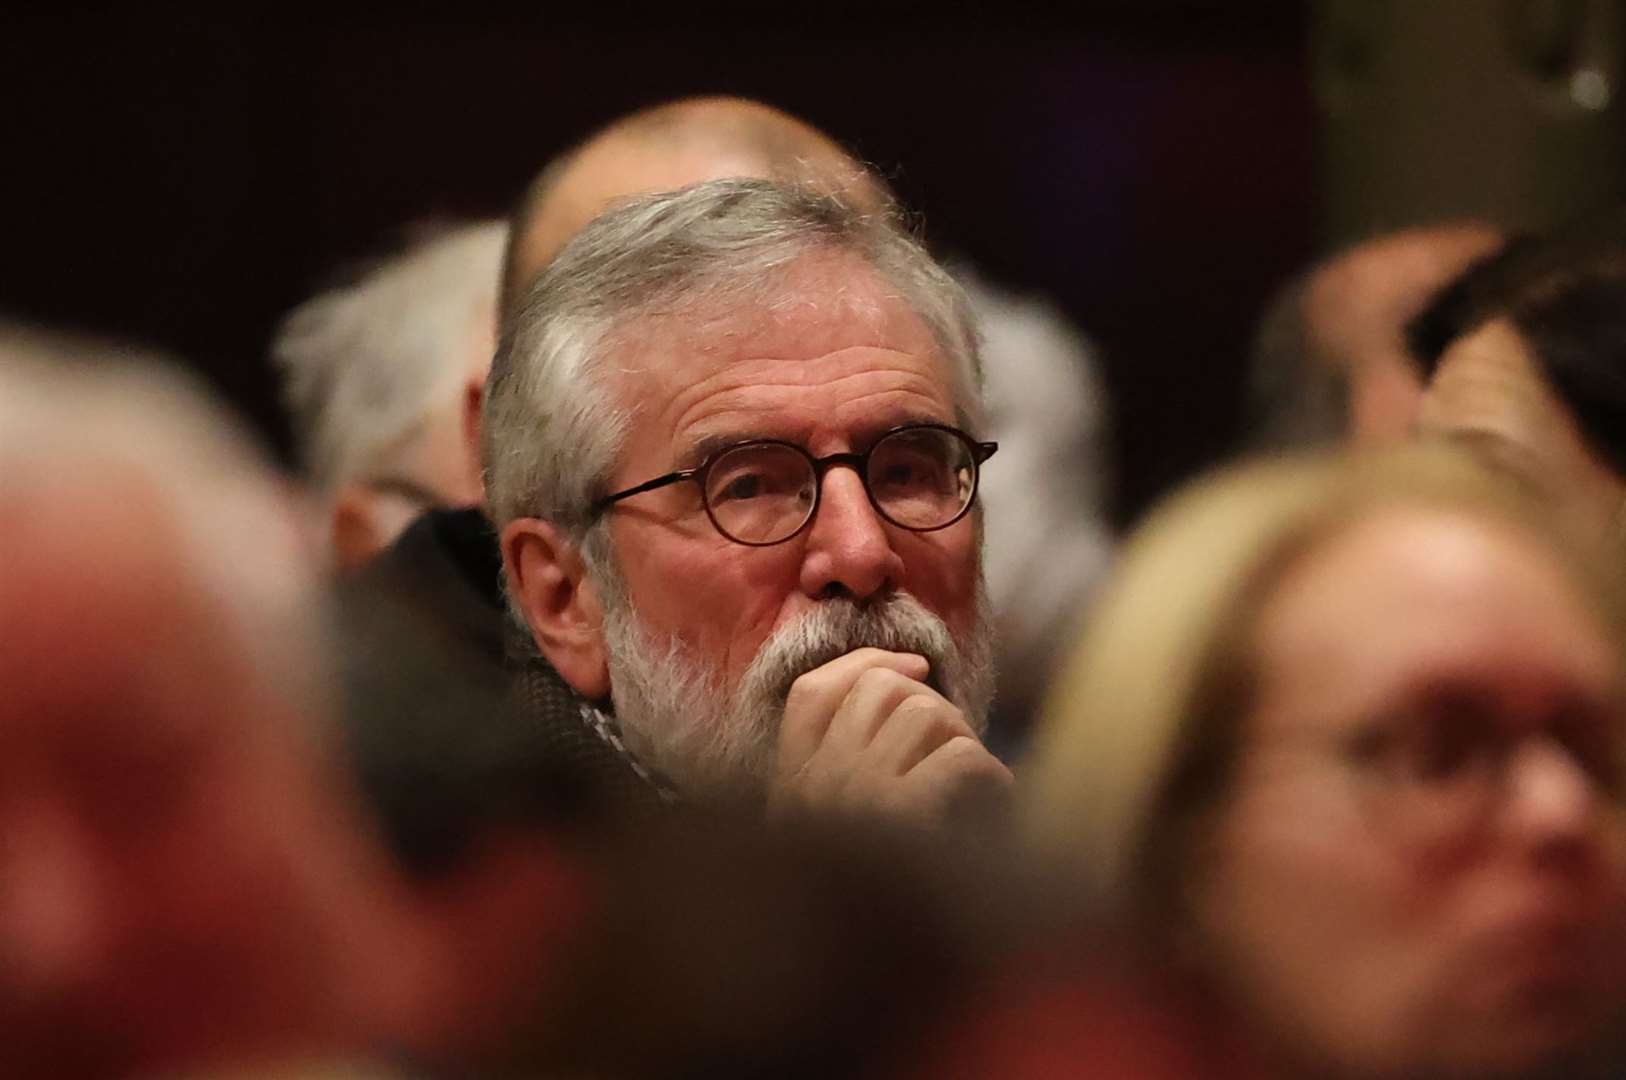 Gerry Adams won a Supreme Court appeal in 2020 over historical convictions (PA)